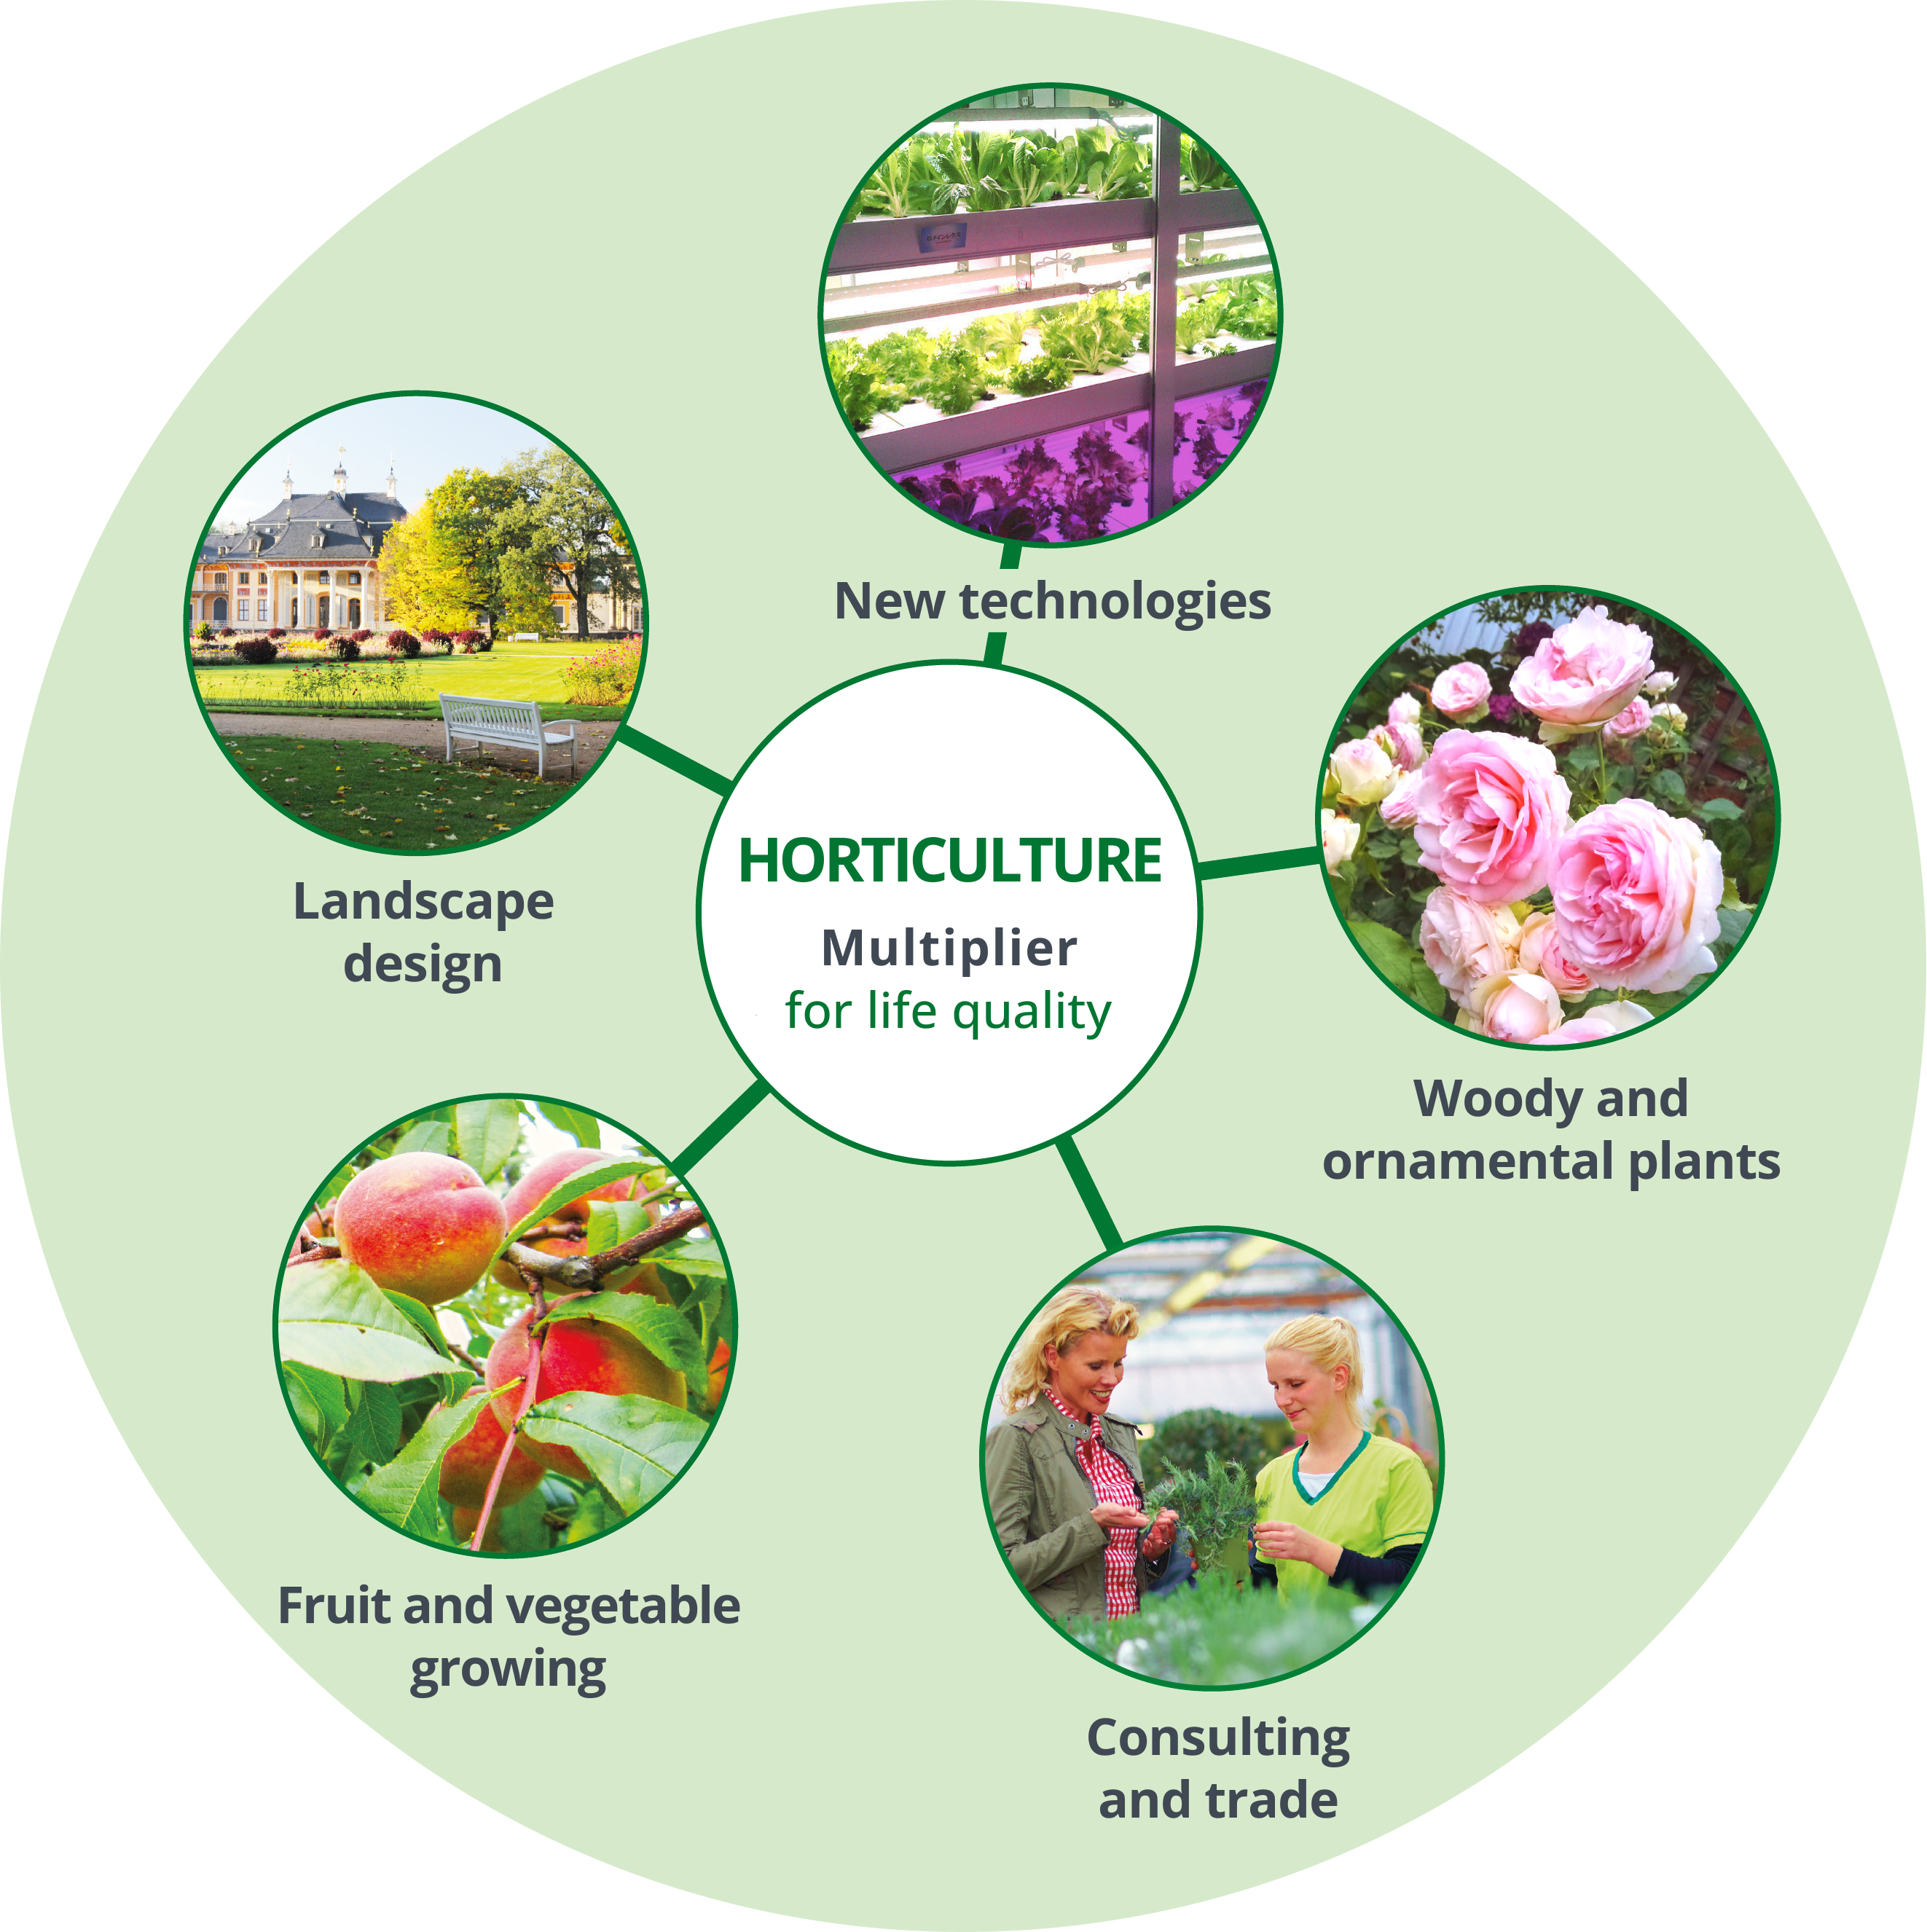 Horticulture - Multiplier for life quality: Fruit and vegetable growing - Woody and ornamental plants - Landscape design - Consulting and trade - New technologies